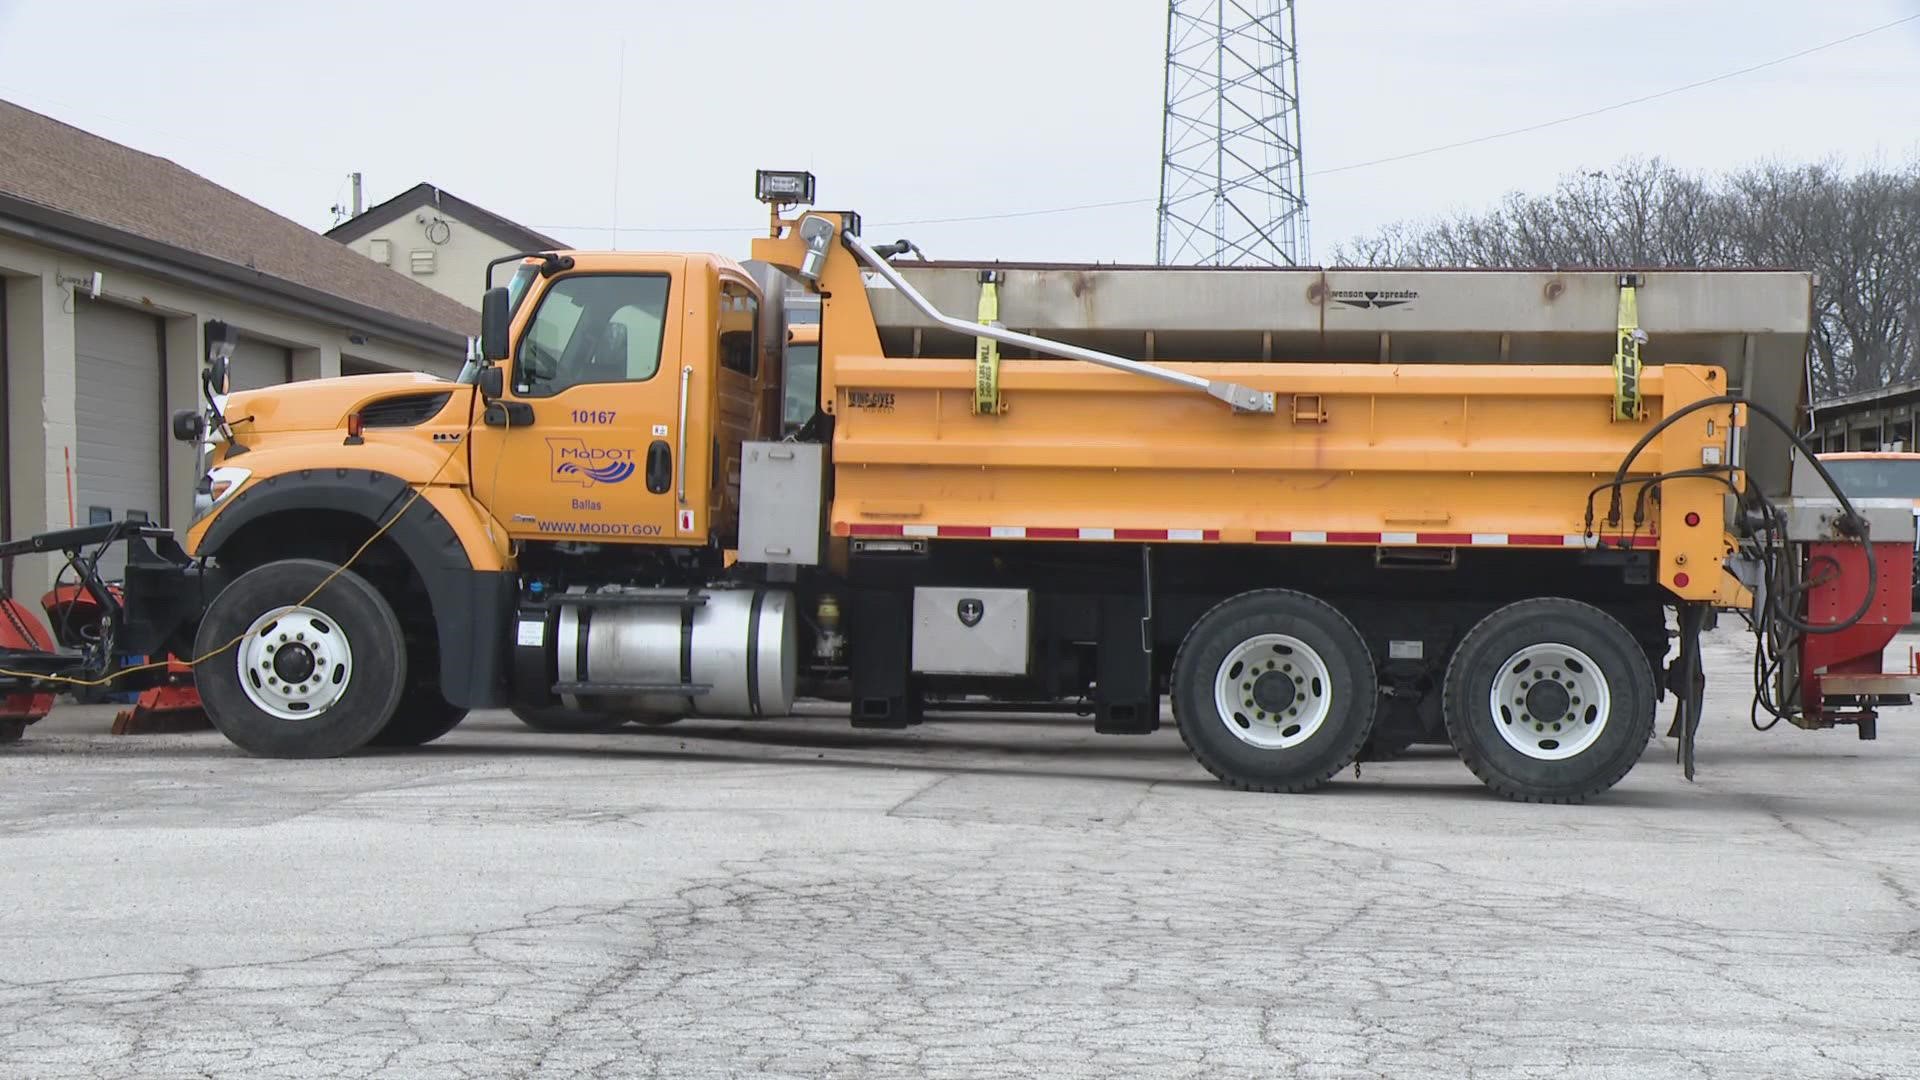 MoDOT and IDOT are urging drivers to prepare ahead of the winter storm. The winter storm is set to impact the area Tuesday night into Wednesday morning.